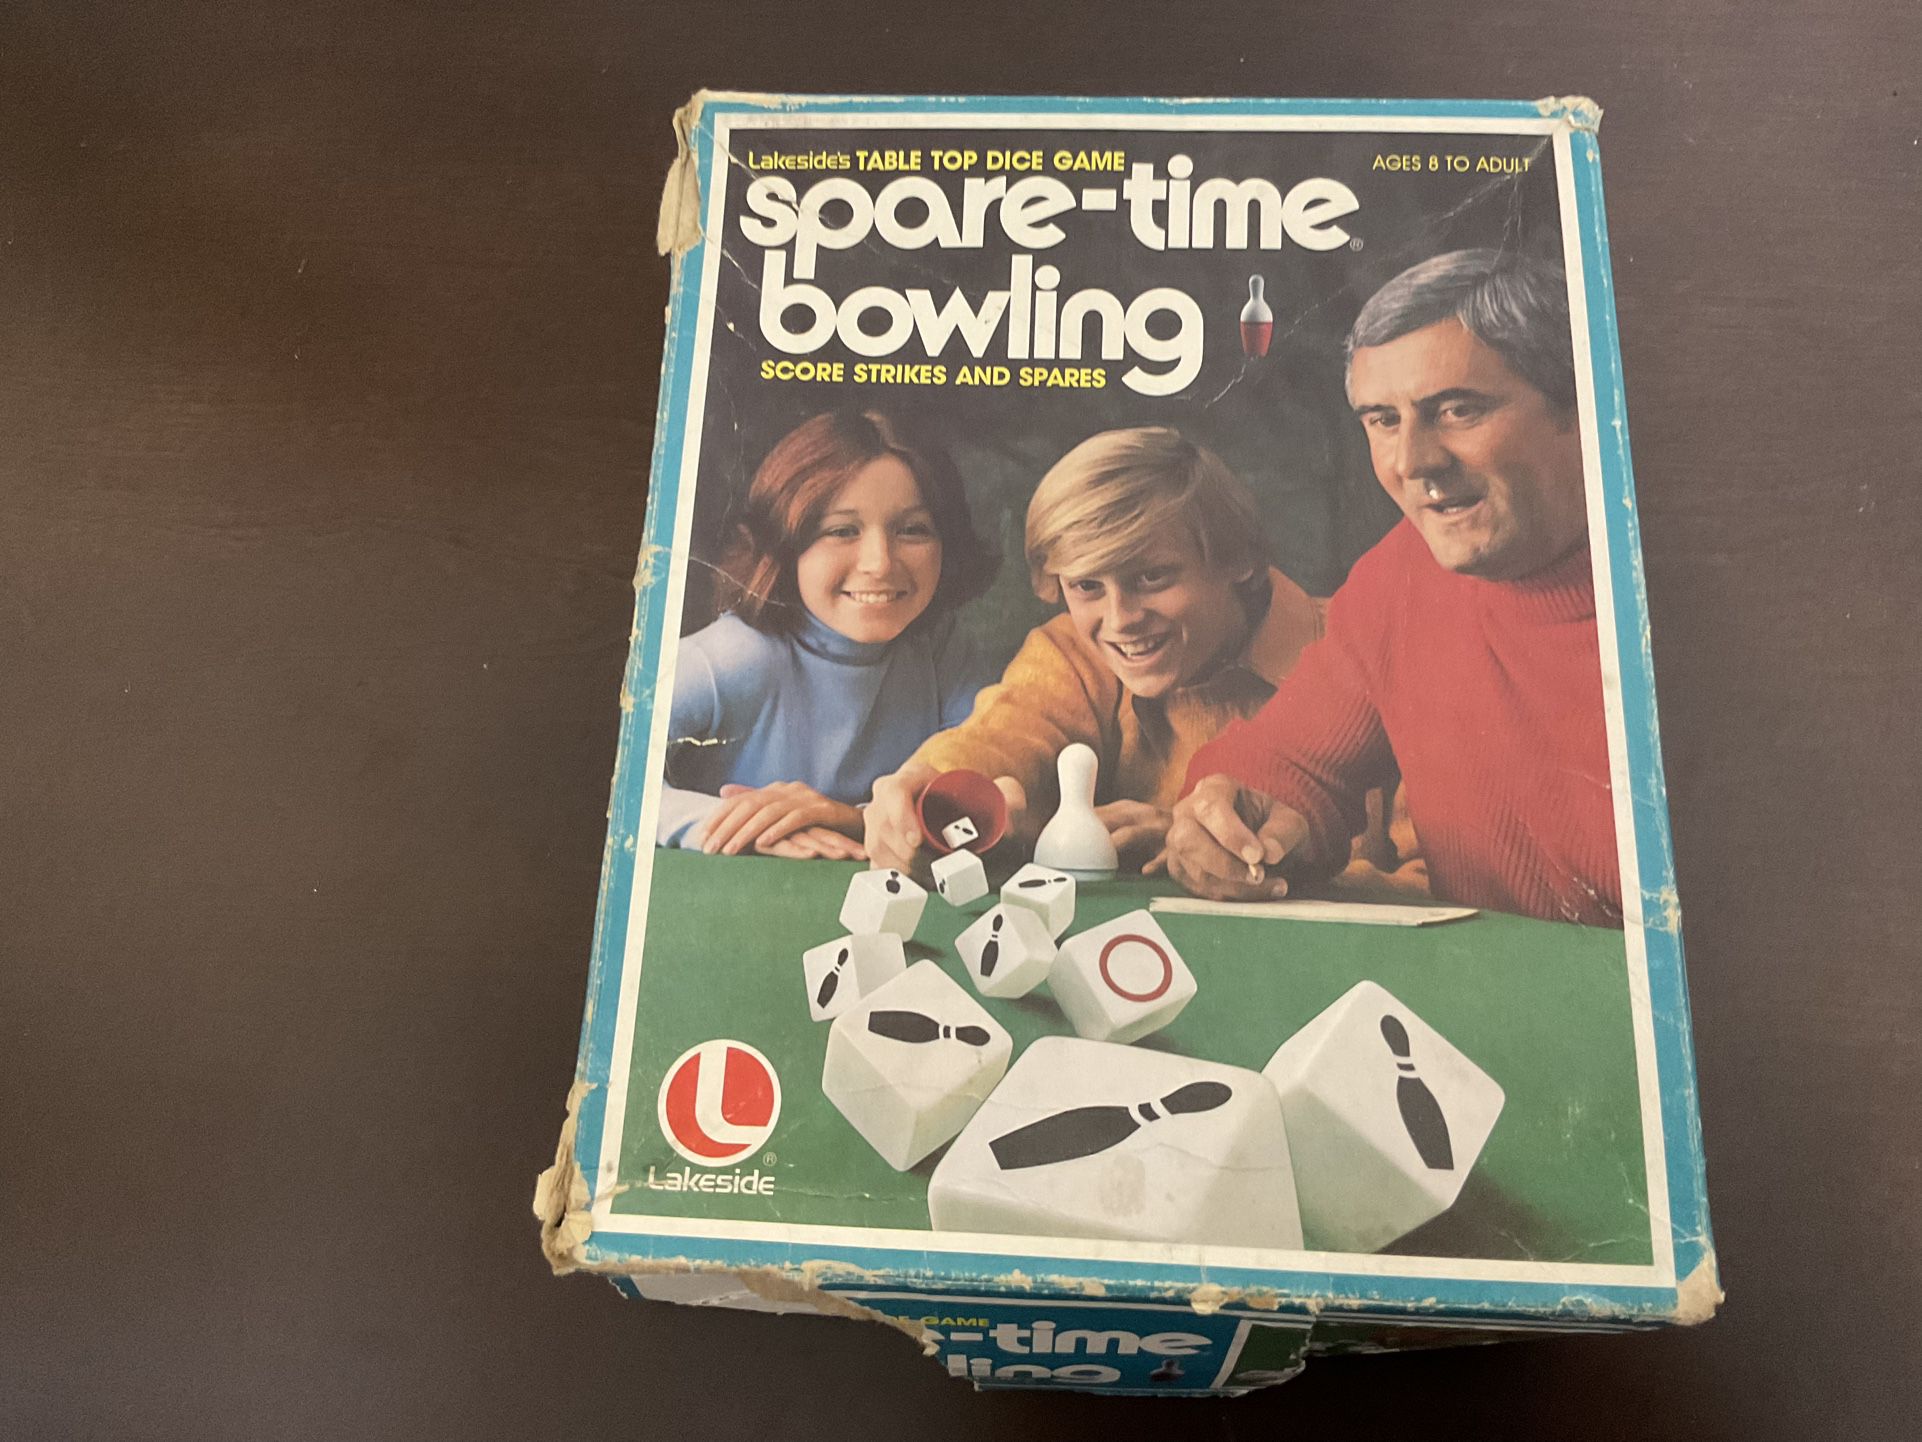 Vintage Spare-Time Bowling Lakeside Table Top Dice Game - 100% Complete!!   Great Gift 🎁   Merry Christmas 🎄🎁 